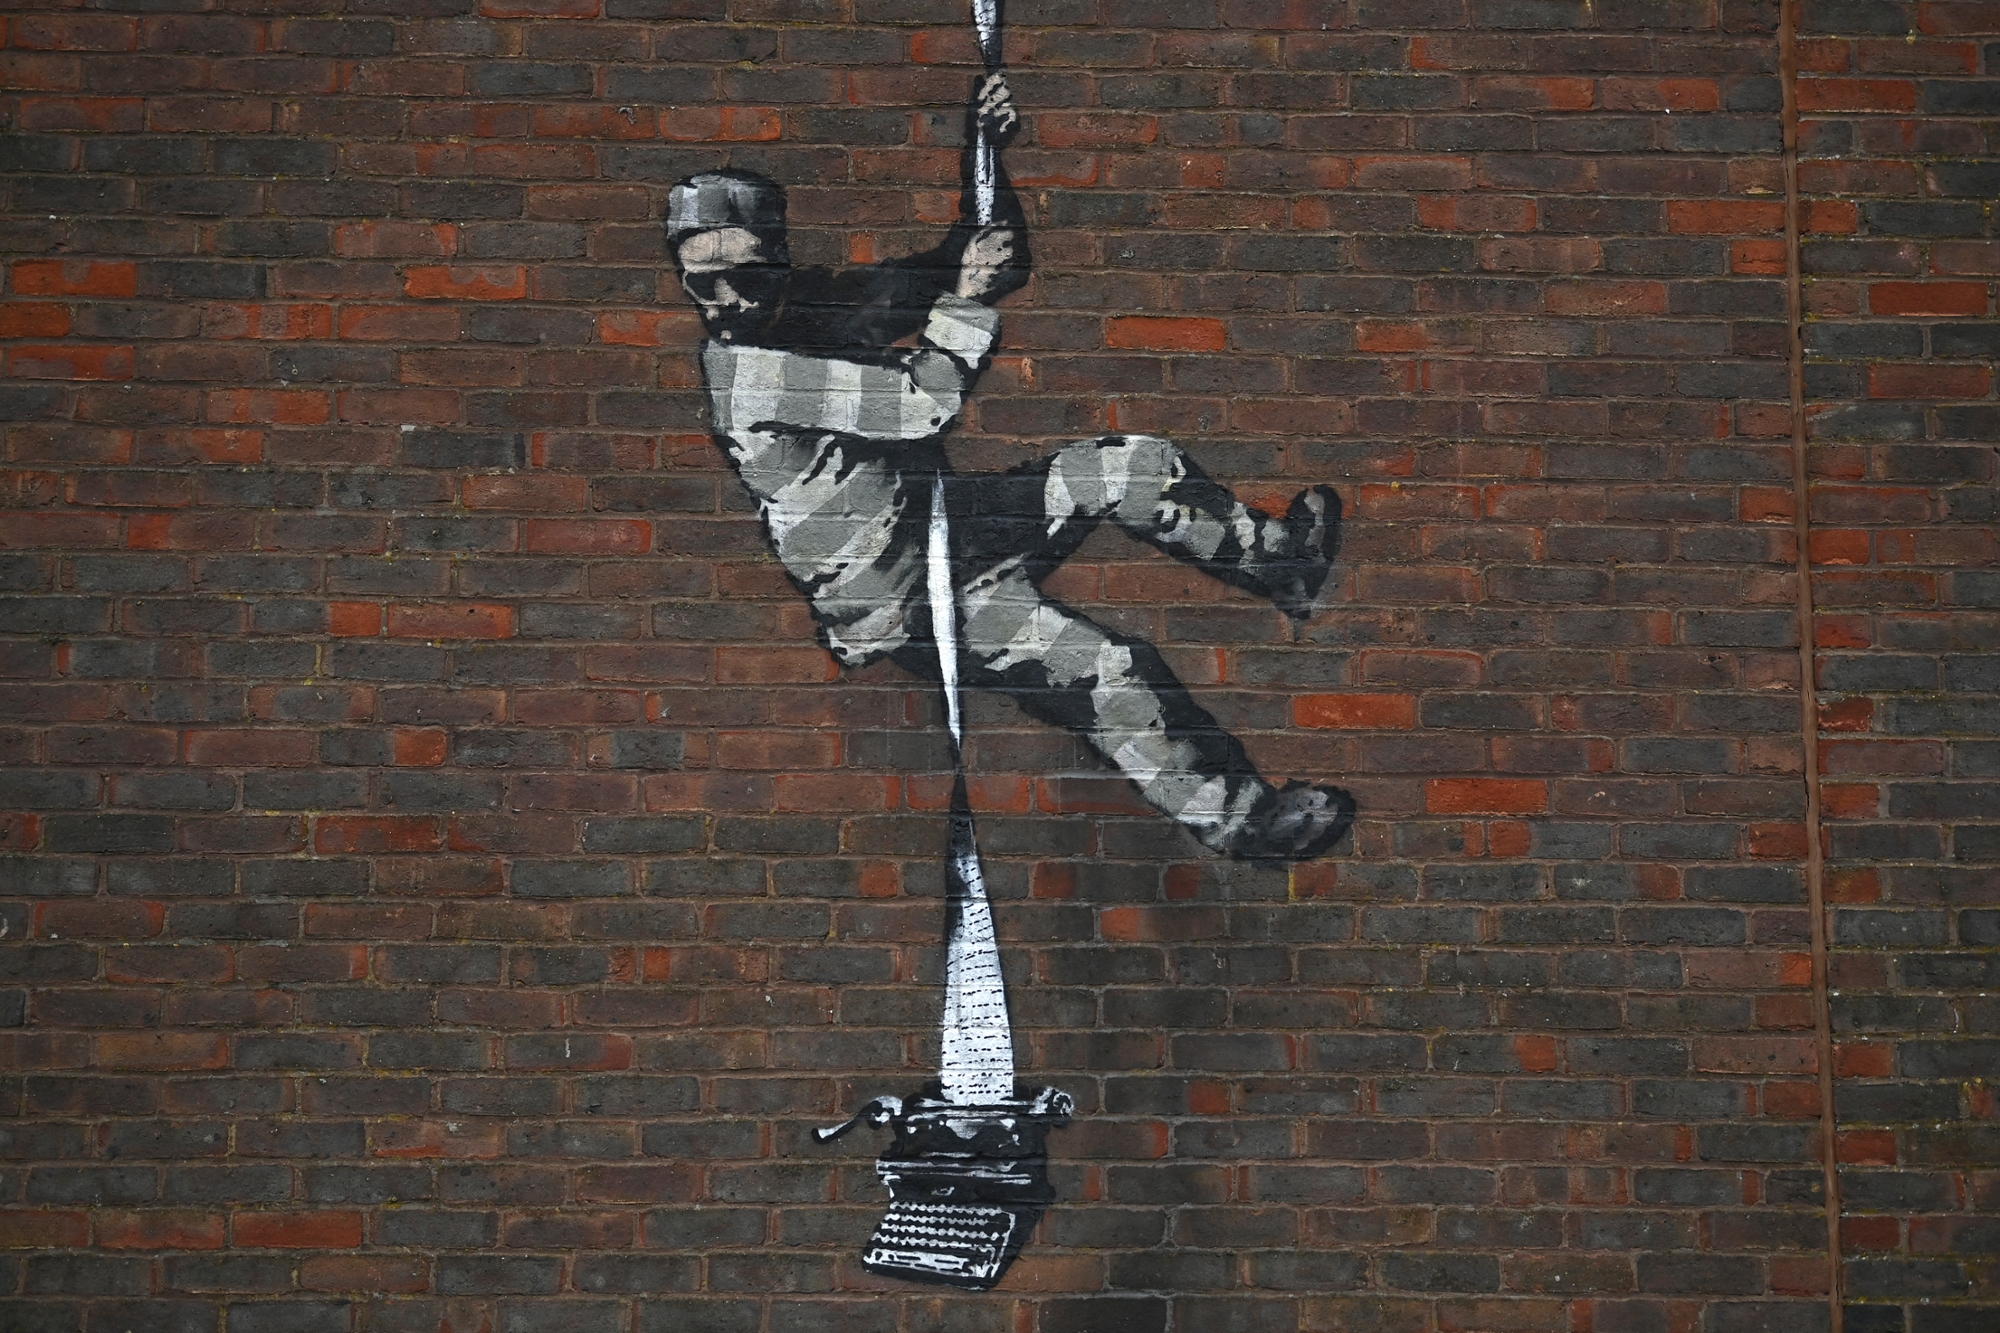 The Three Most Popular Theories of Banksy's Identity